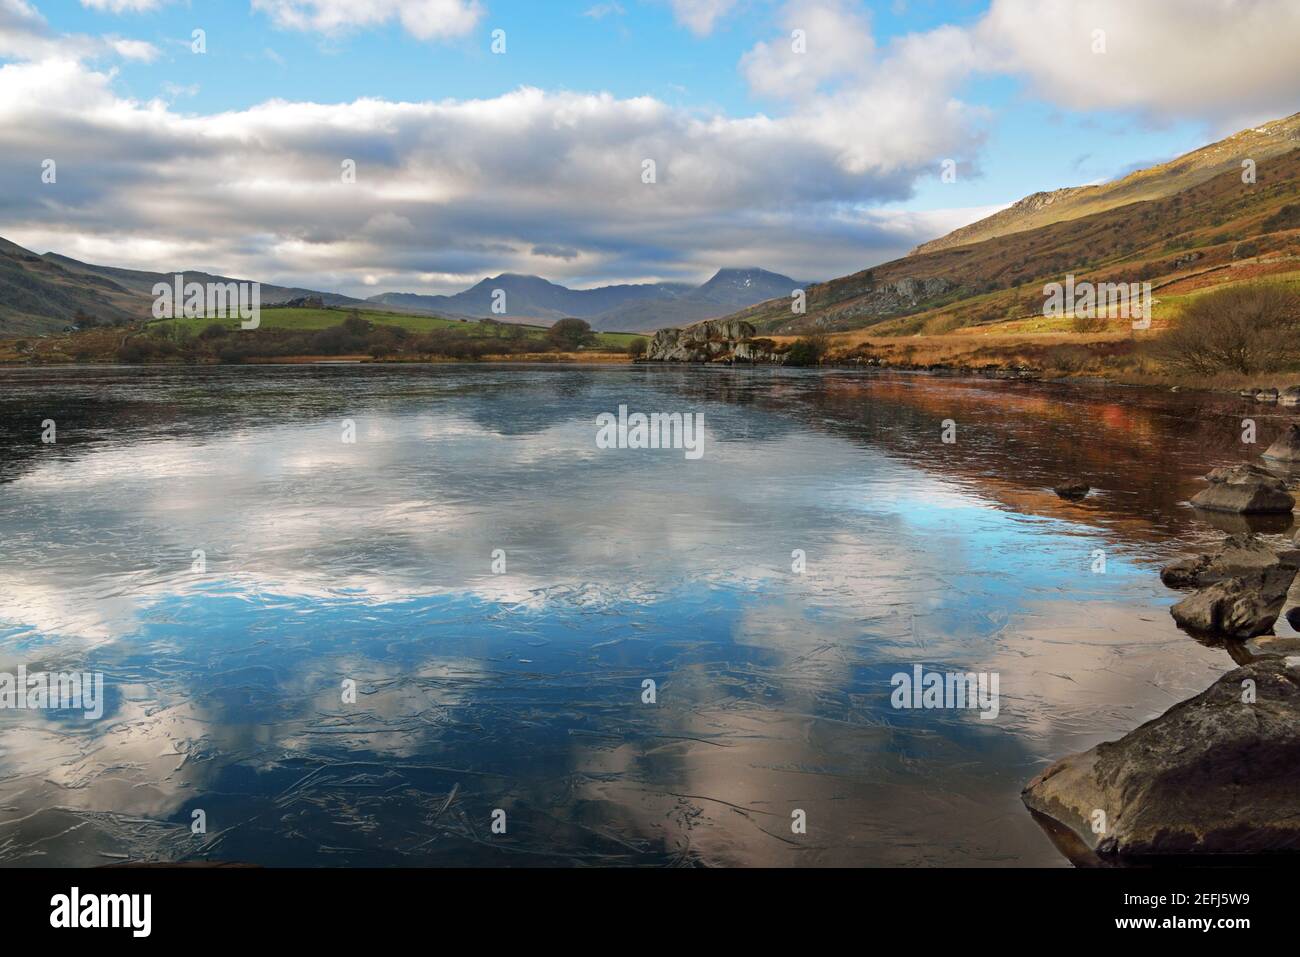 Llynnau Mymbyr are two lakes located in Dyffryn Mymbyr valley in Snowdonia and are here seen frozen with mount Snowdon in the background. Stock Photo